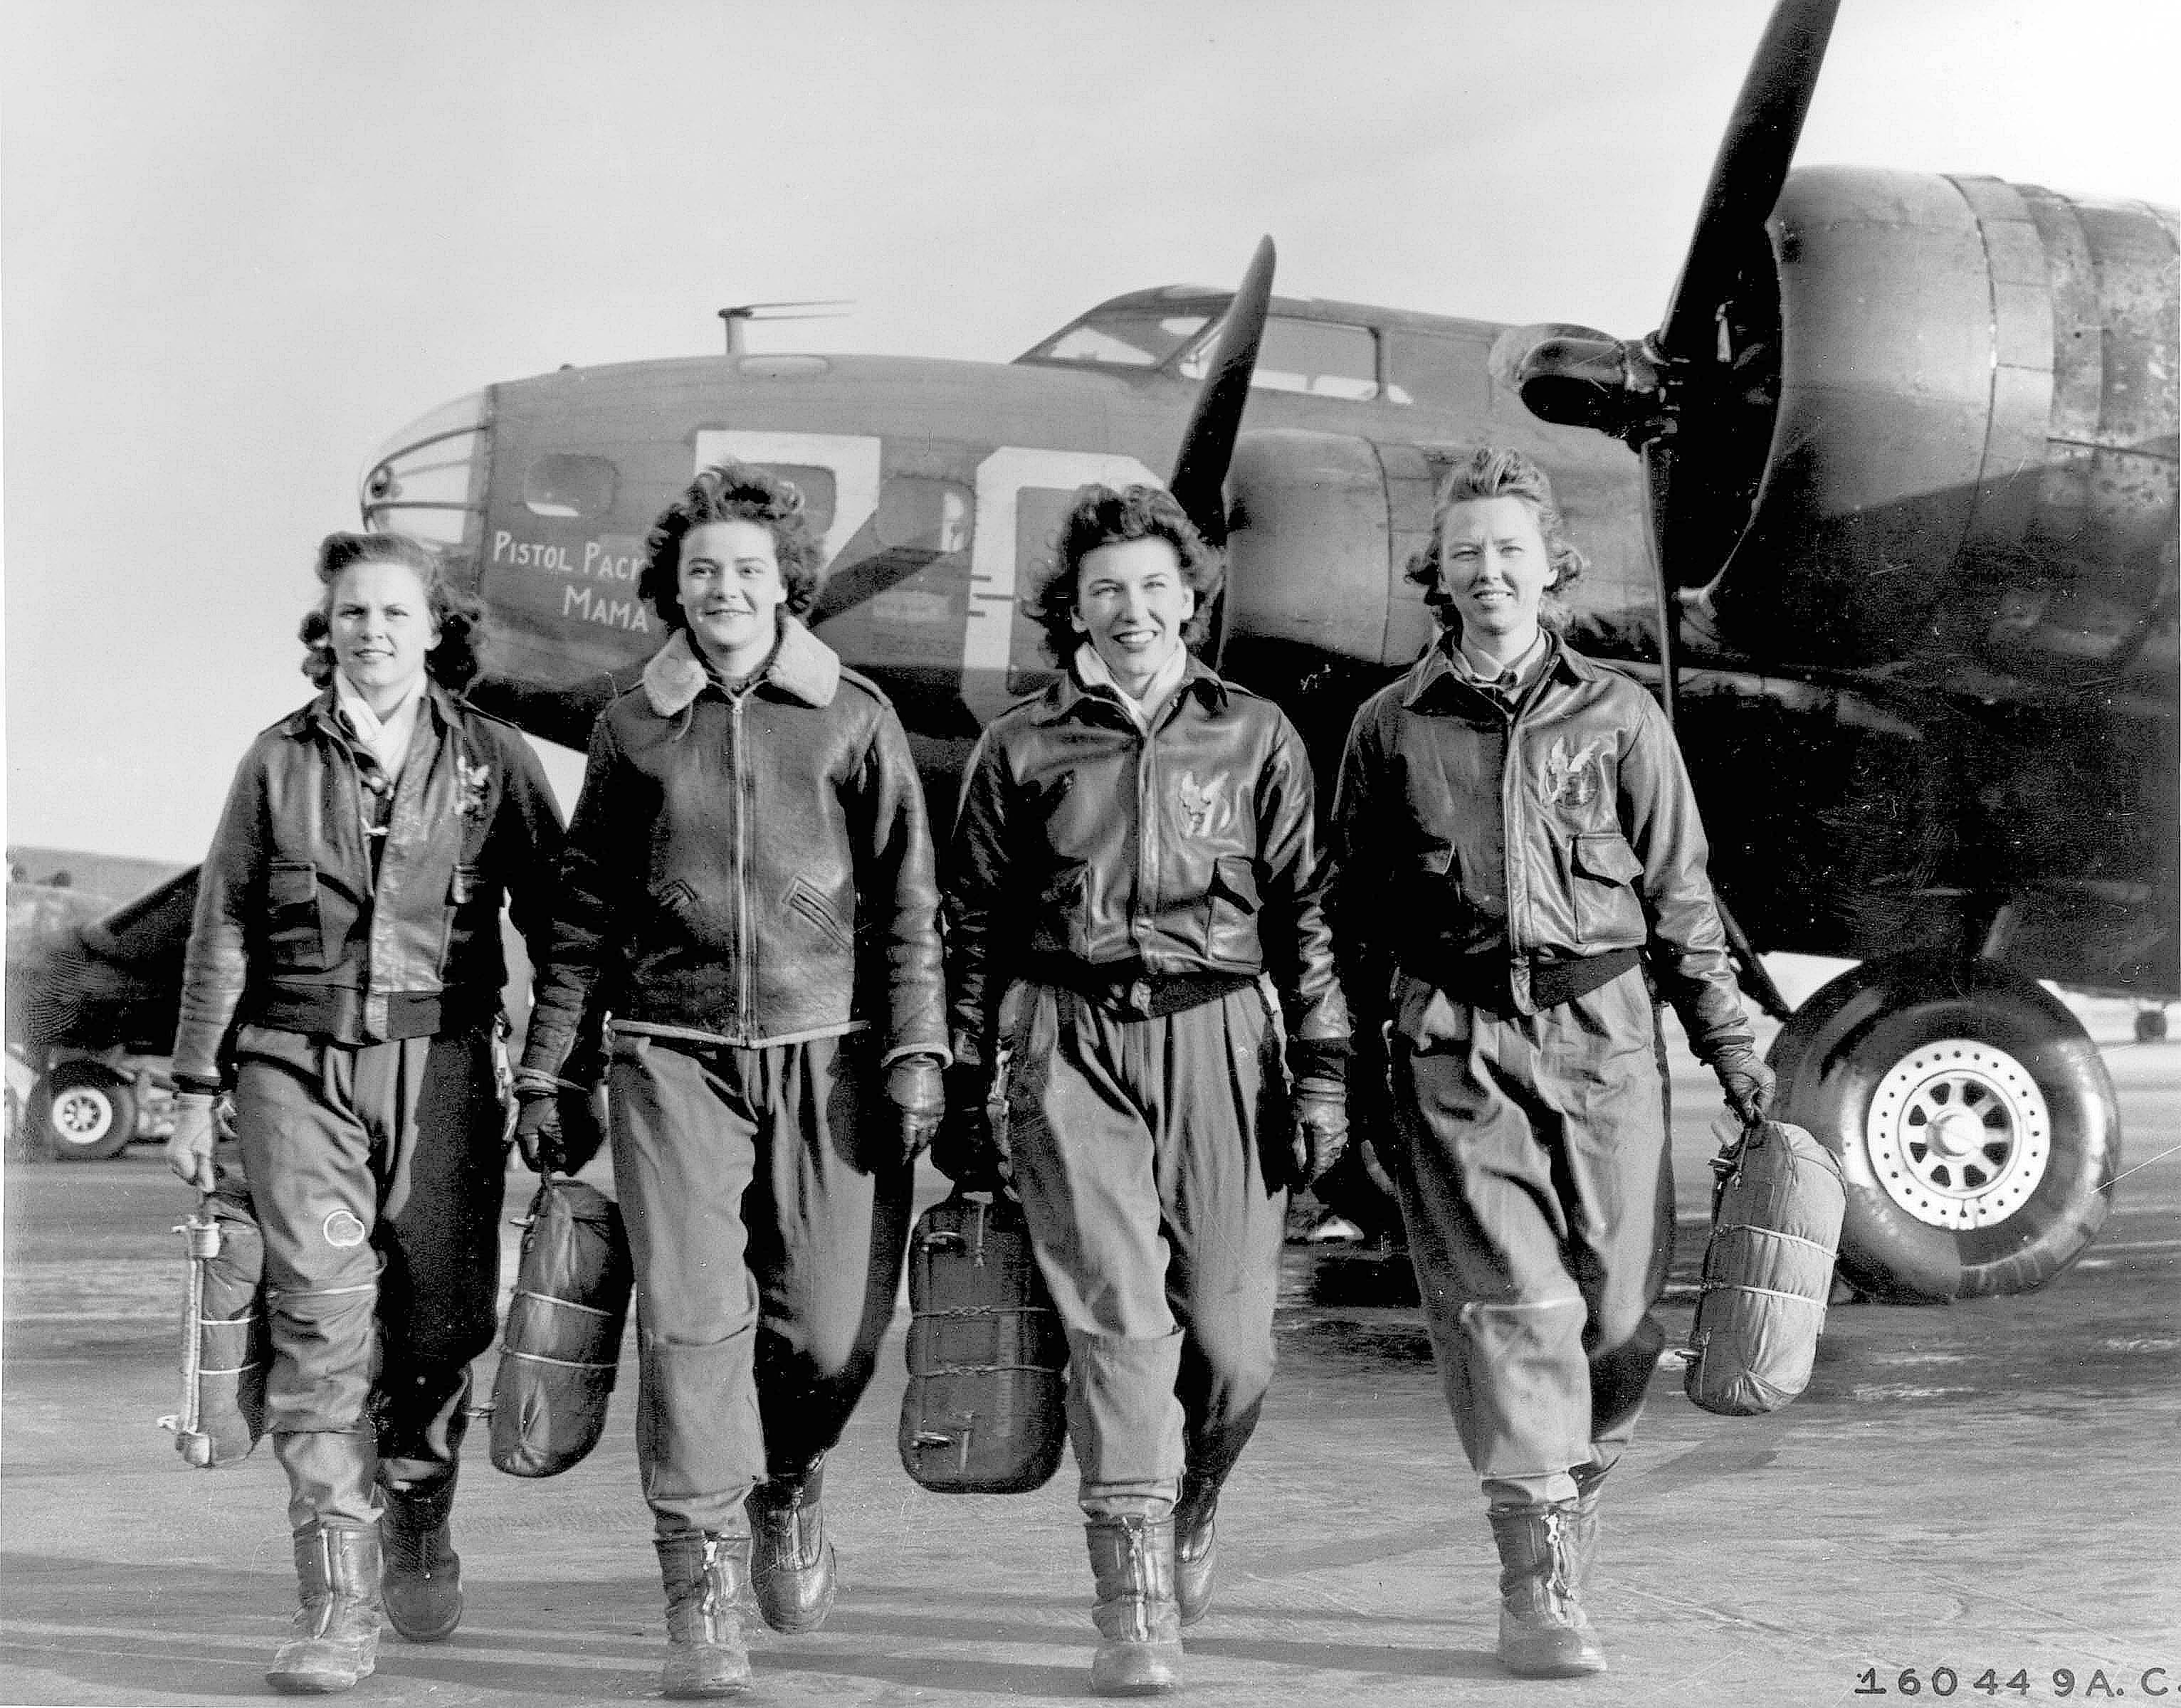 Group_of_Women_Airforce_Service_Pilots_and_B-17_Flying_Fortress.jpg